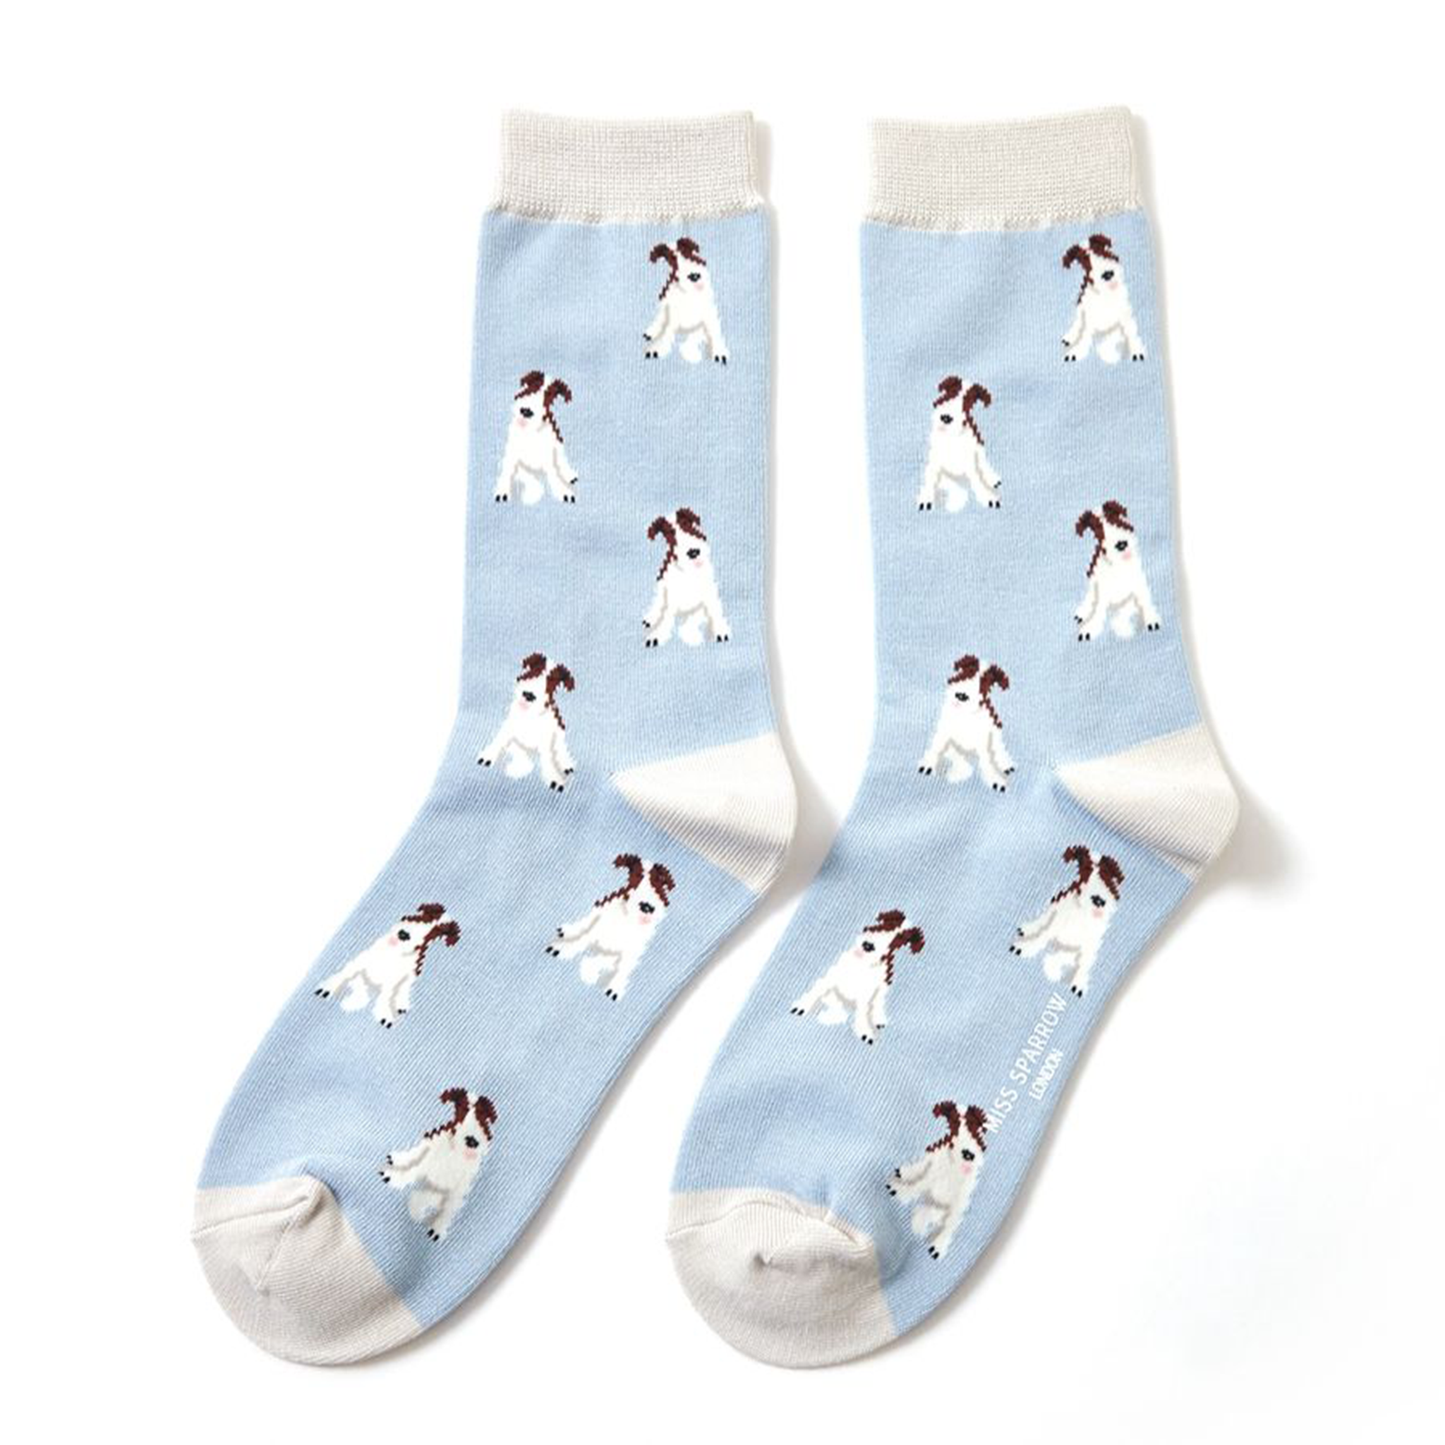 light blue socks with fox terrier dogs on them